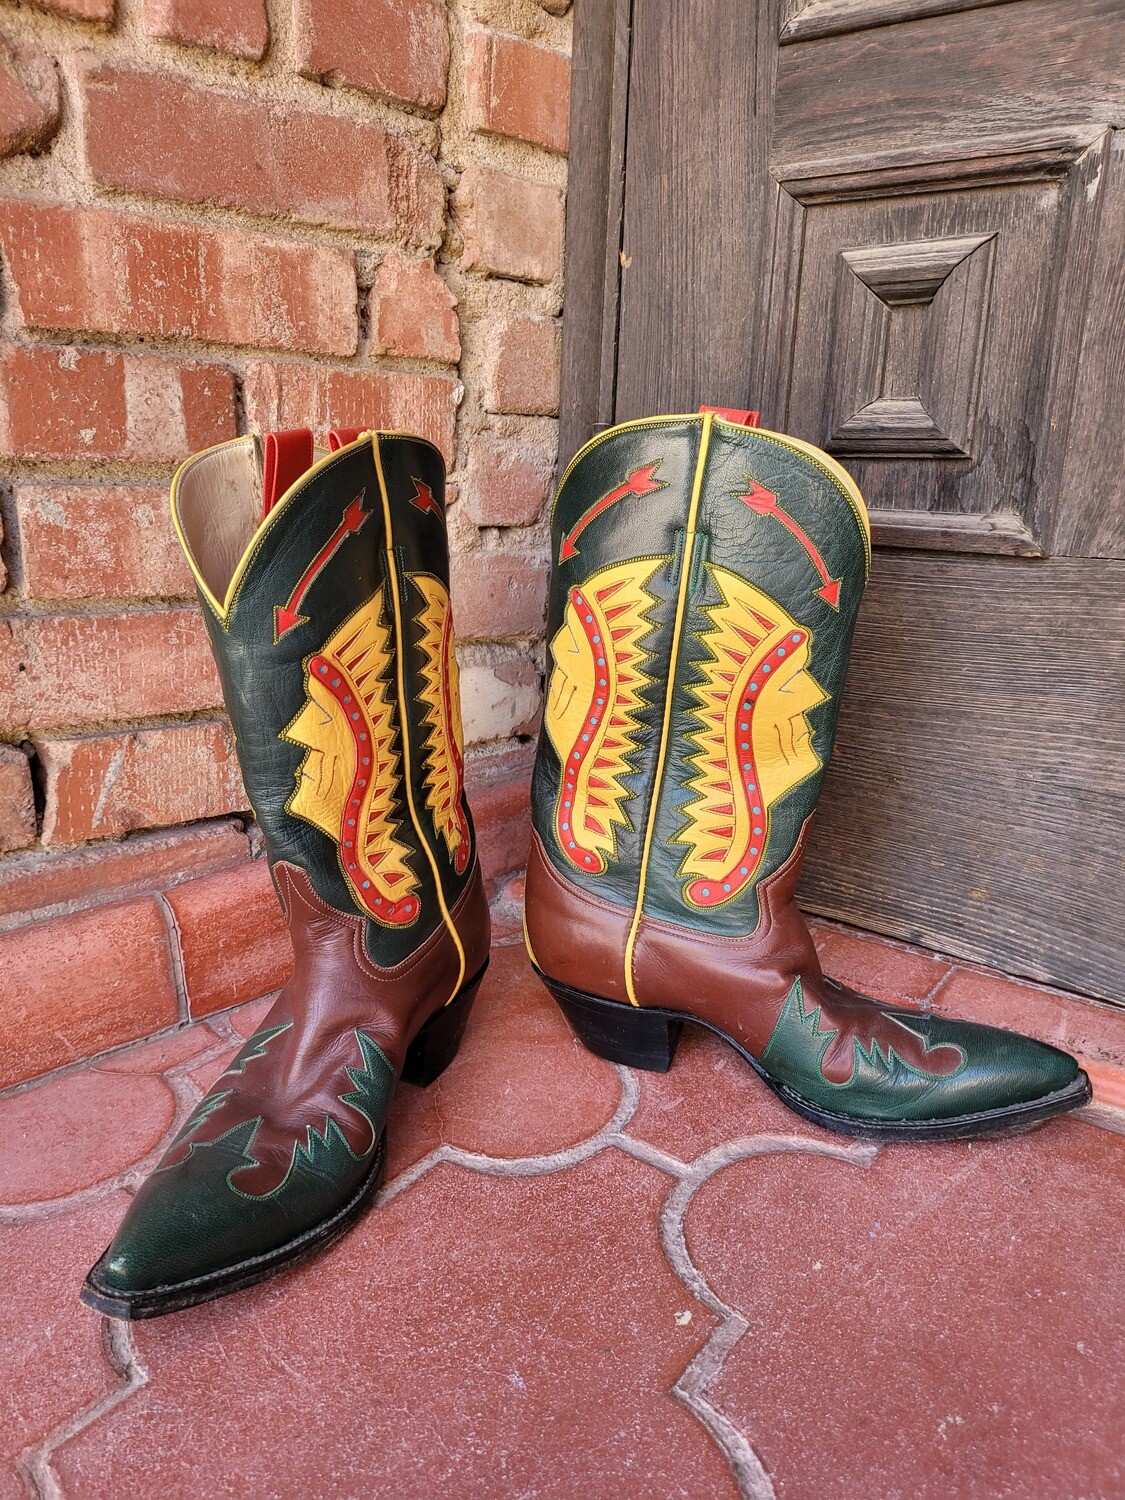 7.5B Ladies RocketBuster Indian Head Cowboy Boots Closeout